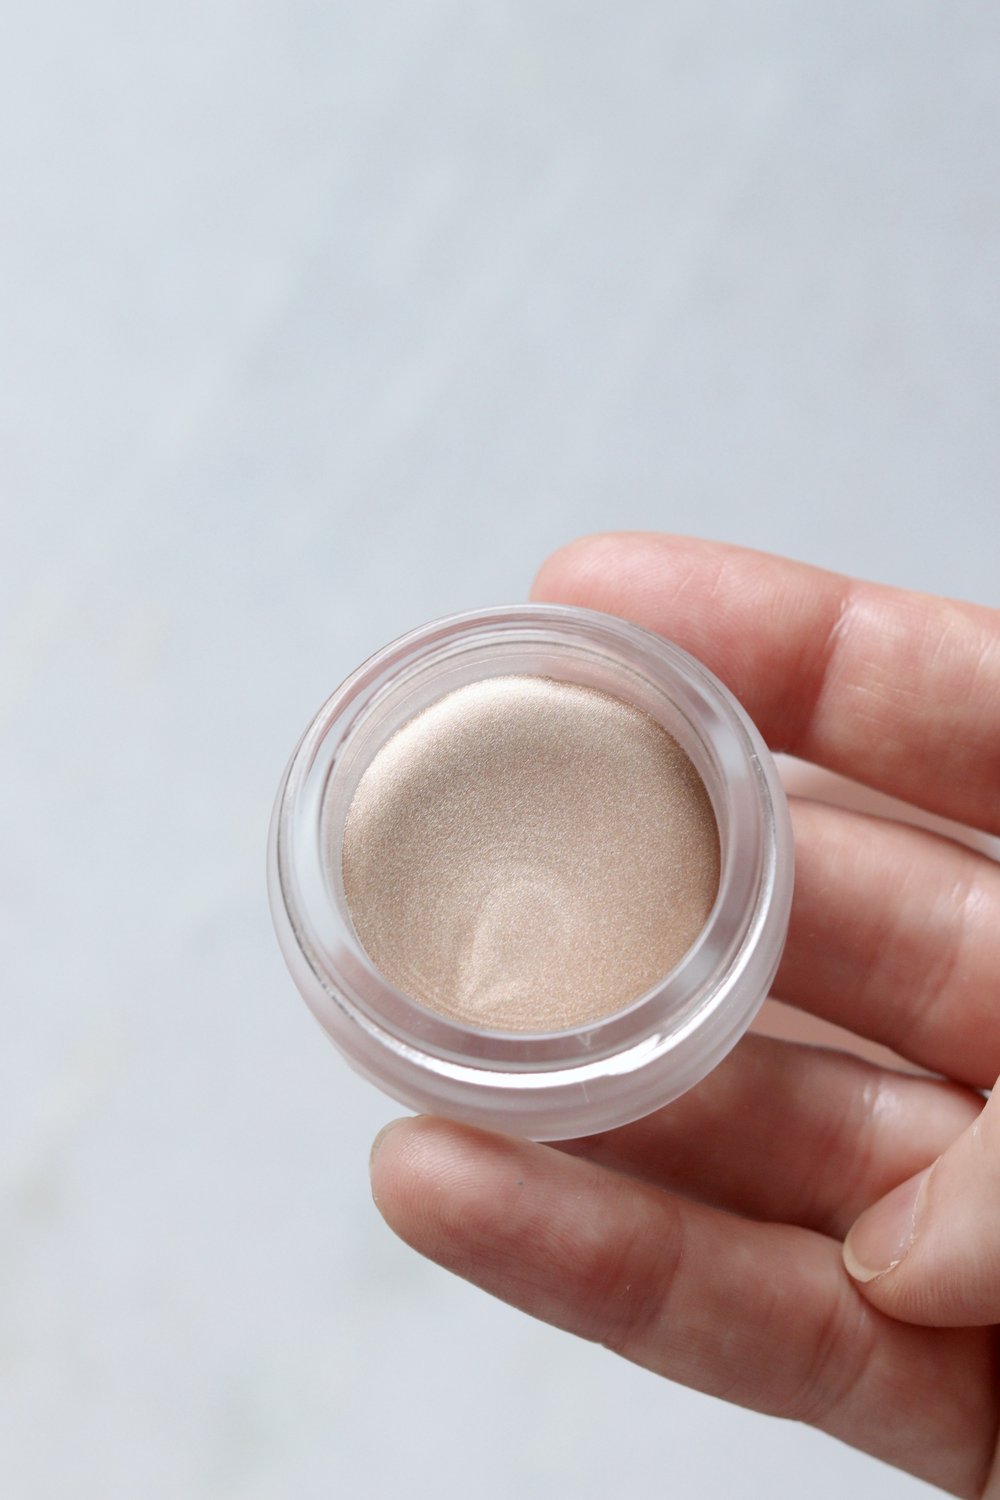 My Honest Review of the Minori Cream Highlighter in Champagne | The  StyleShaker™ Scorecard, Clean Beauty Guide — The StyleShaker - A Guide to  Clean Beauty, Skincare & More.